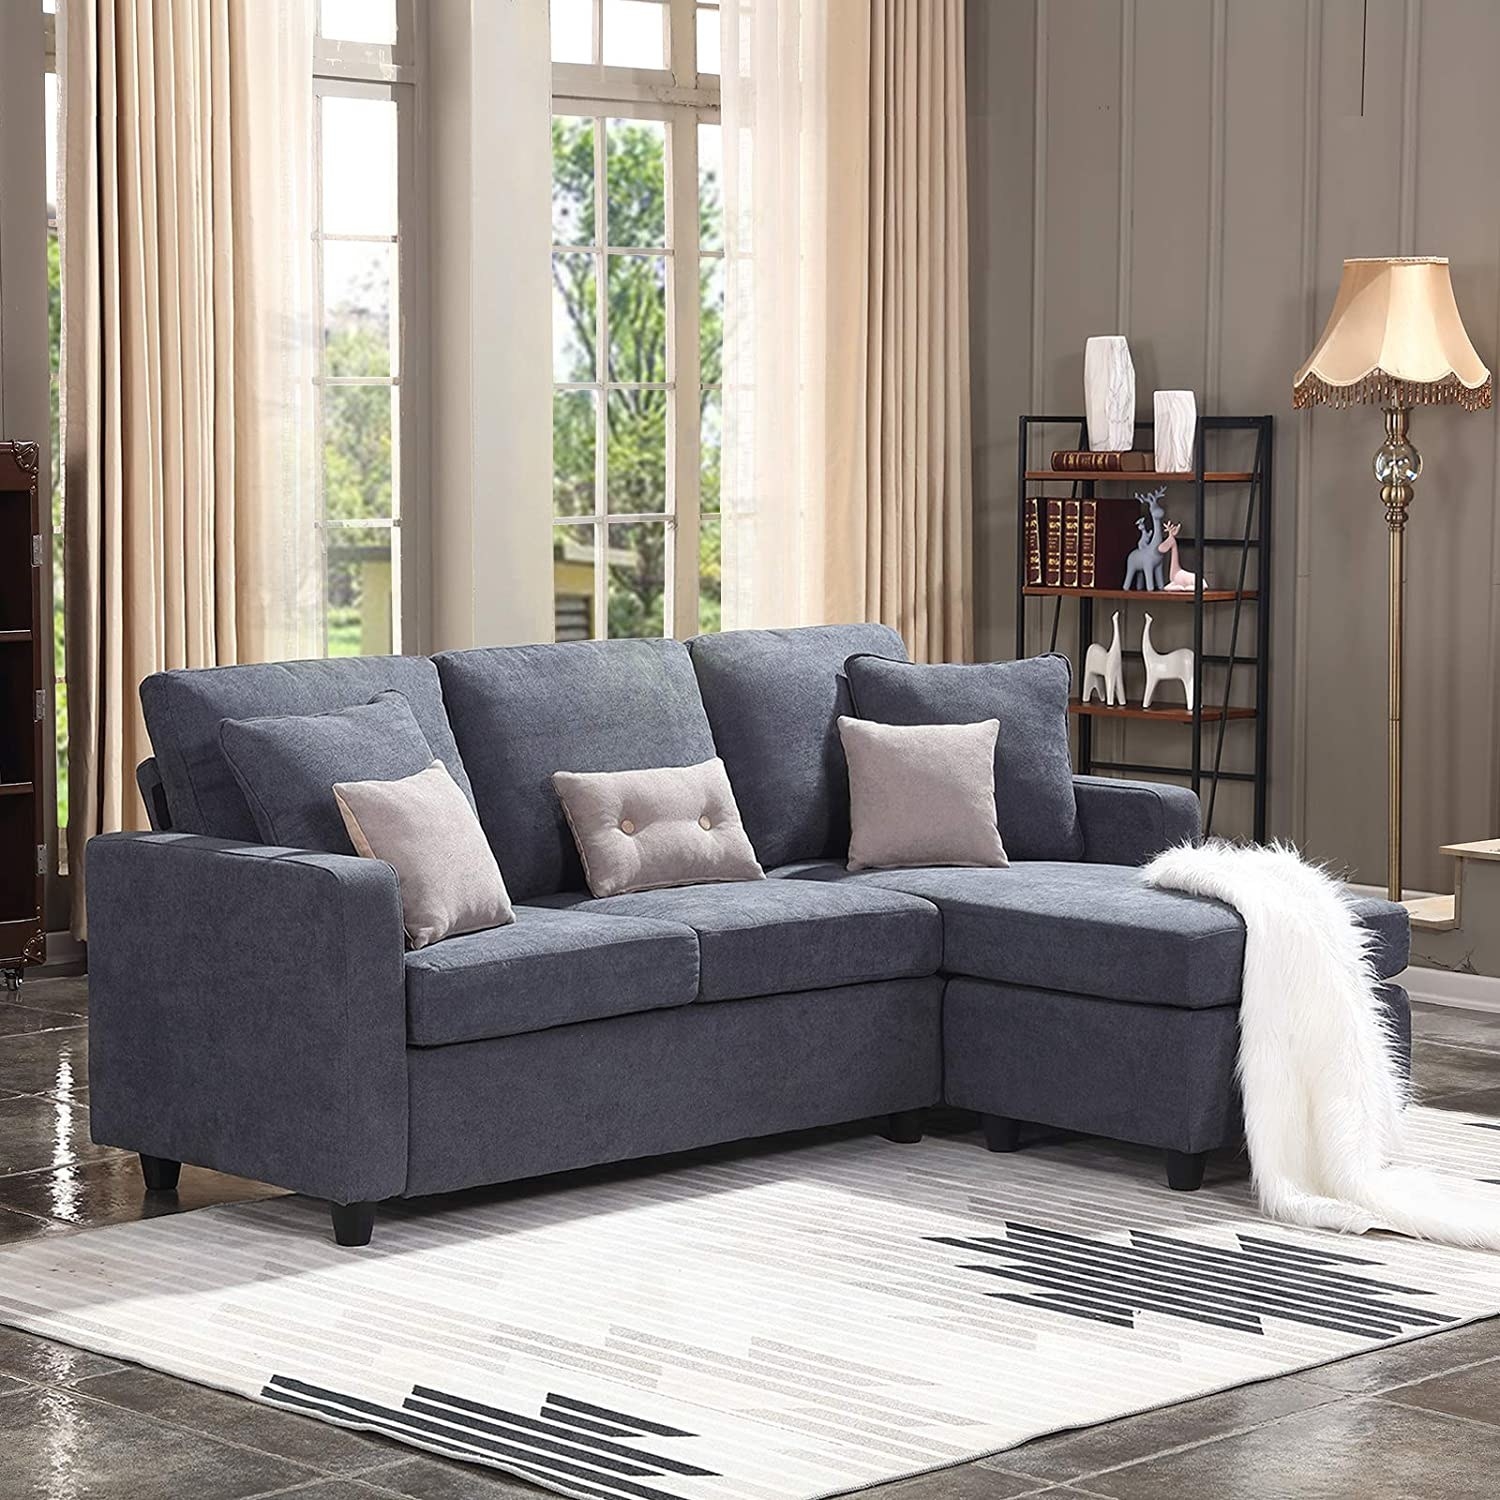 A convertible sectional sofa that seats two people comfortably 